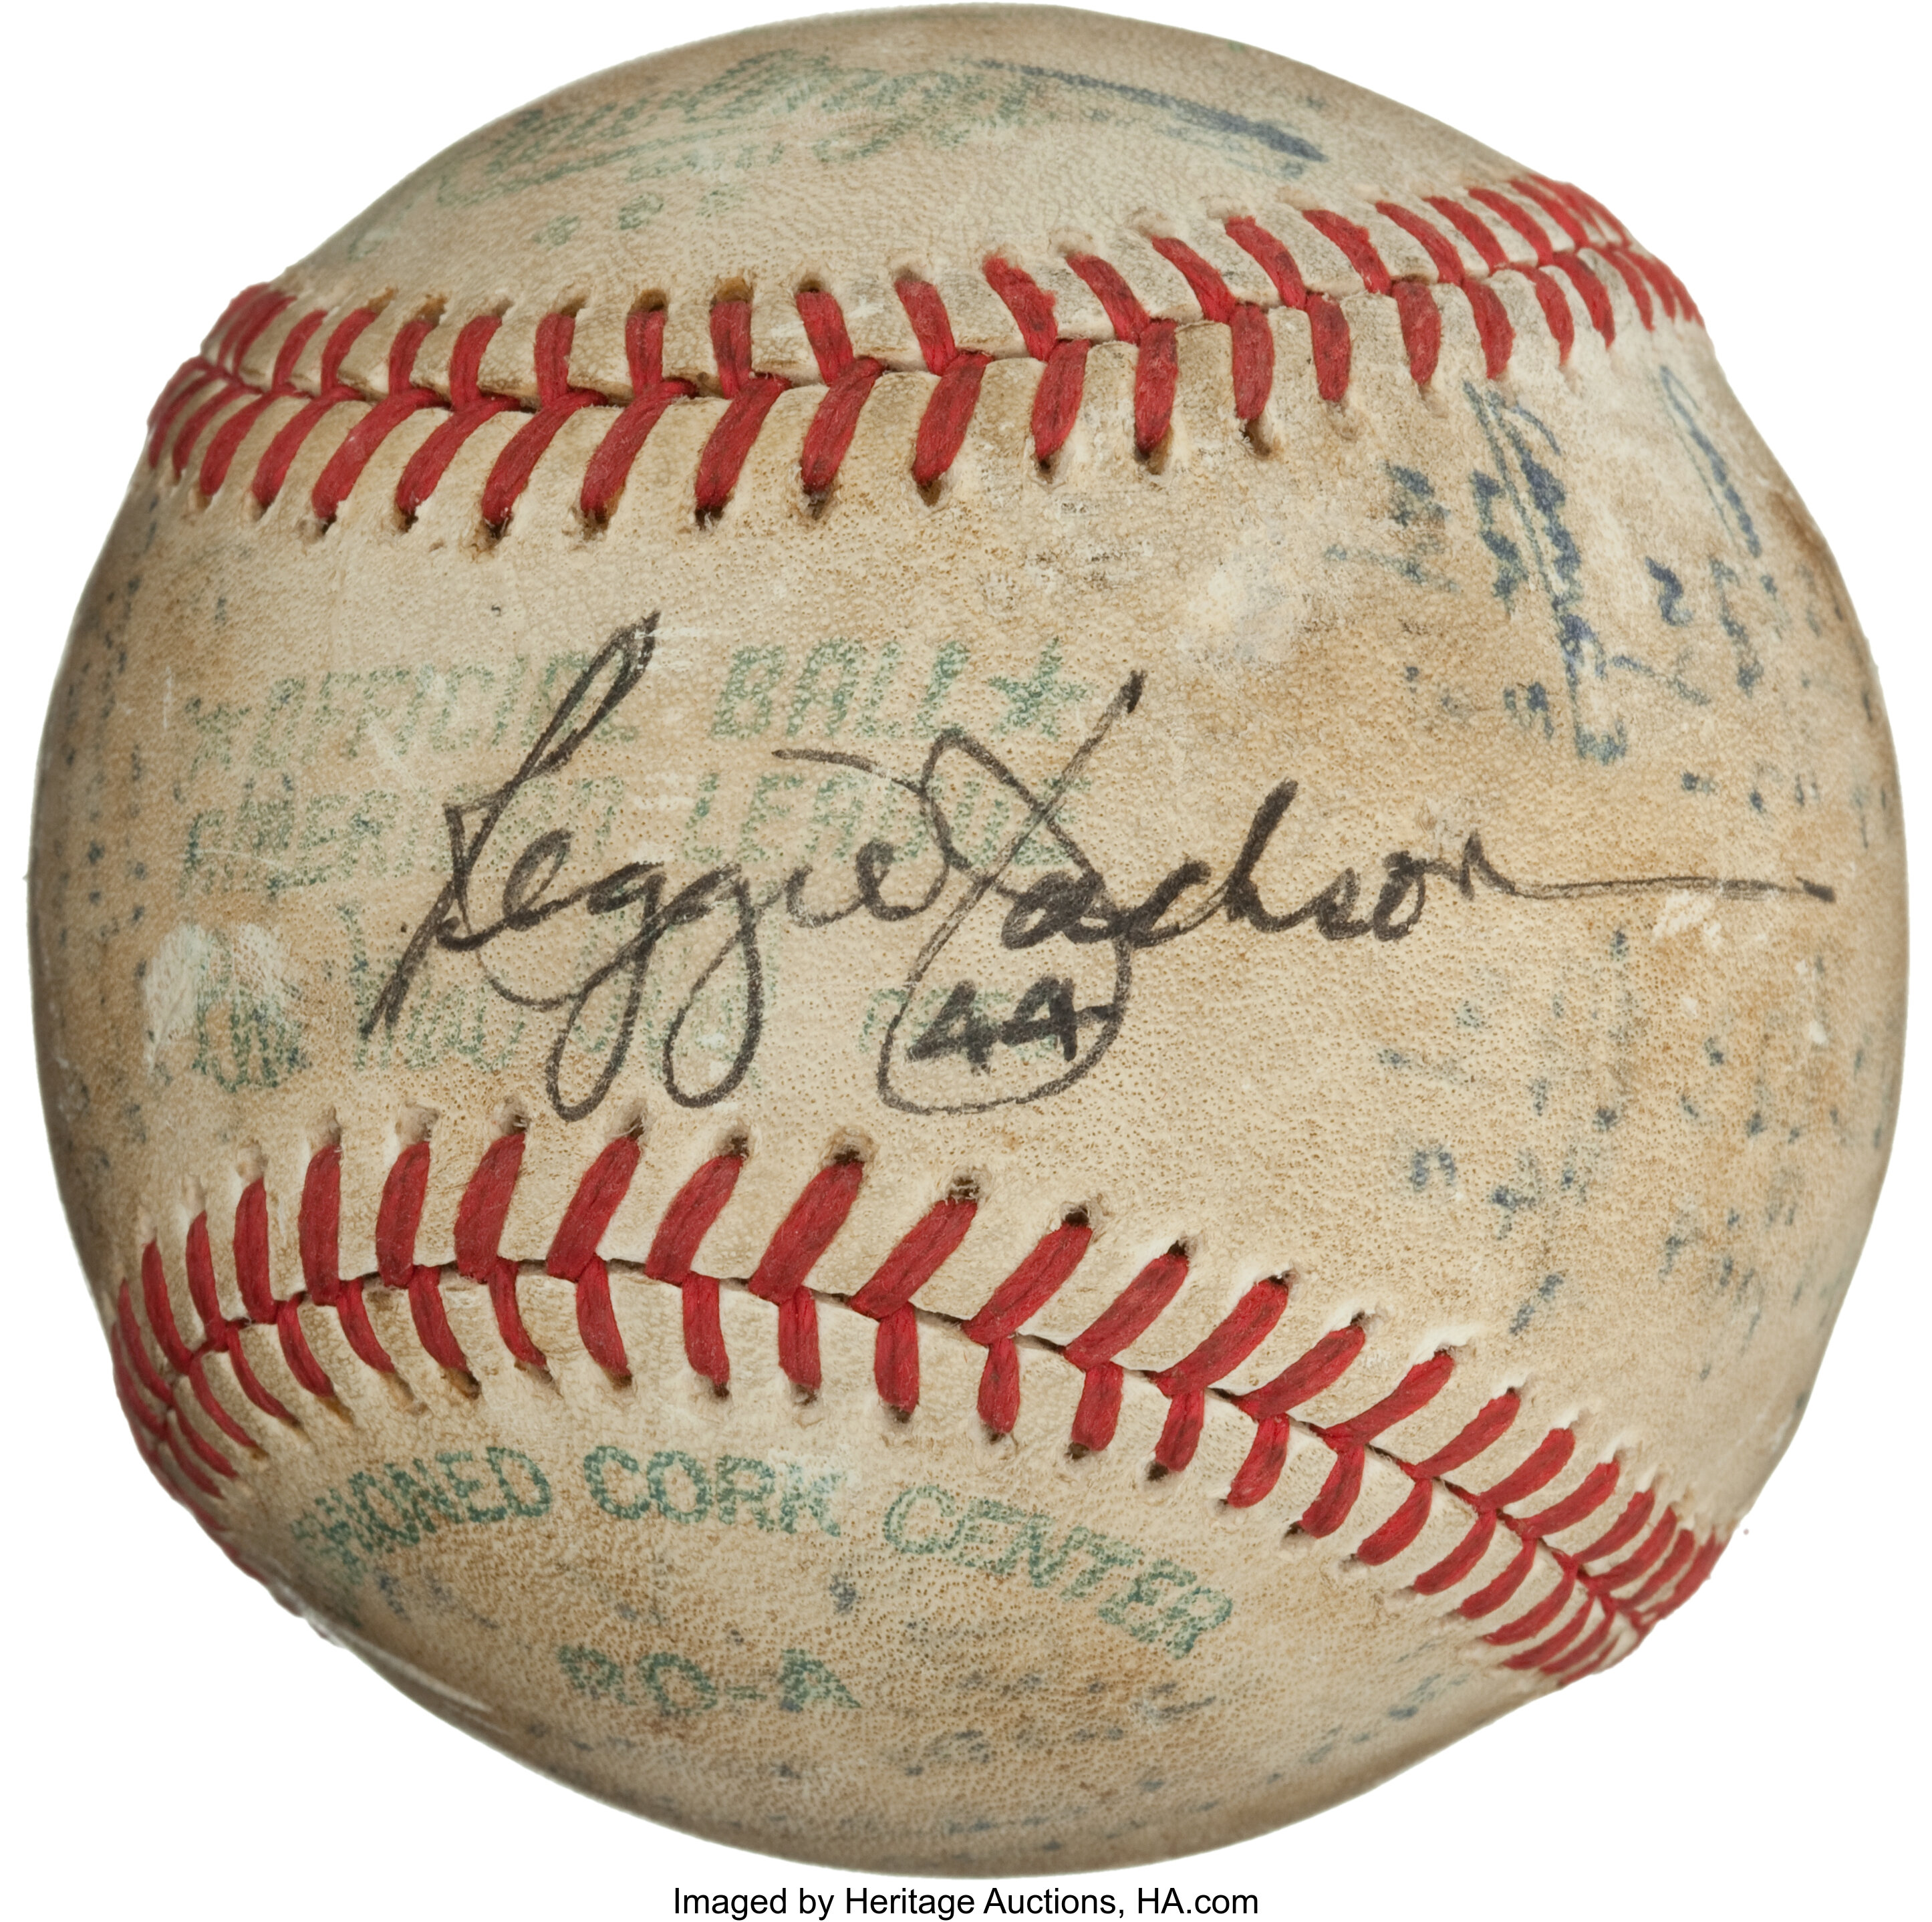 Reggie Jackson to Auction Off Sign From Old Yankee Stadium - The